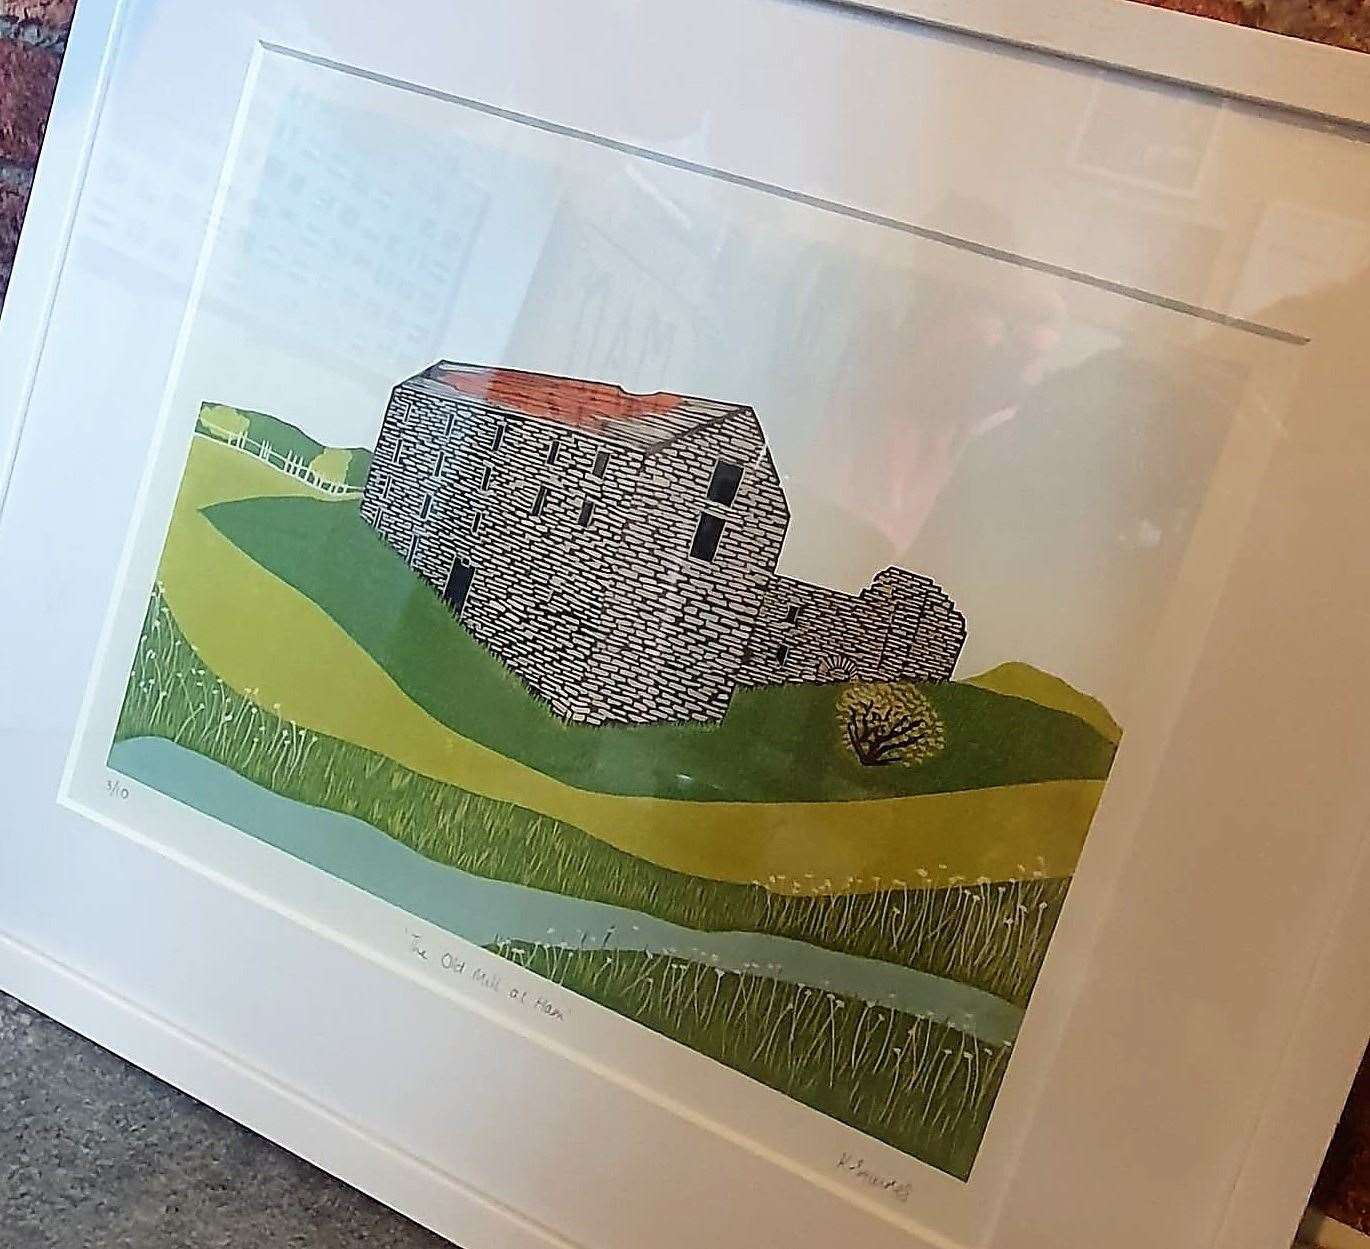 Katie Squires is an artist and photographer specializing in lino prints and gifts.